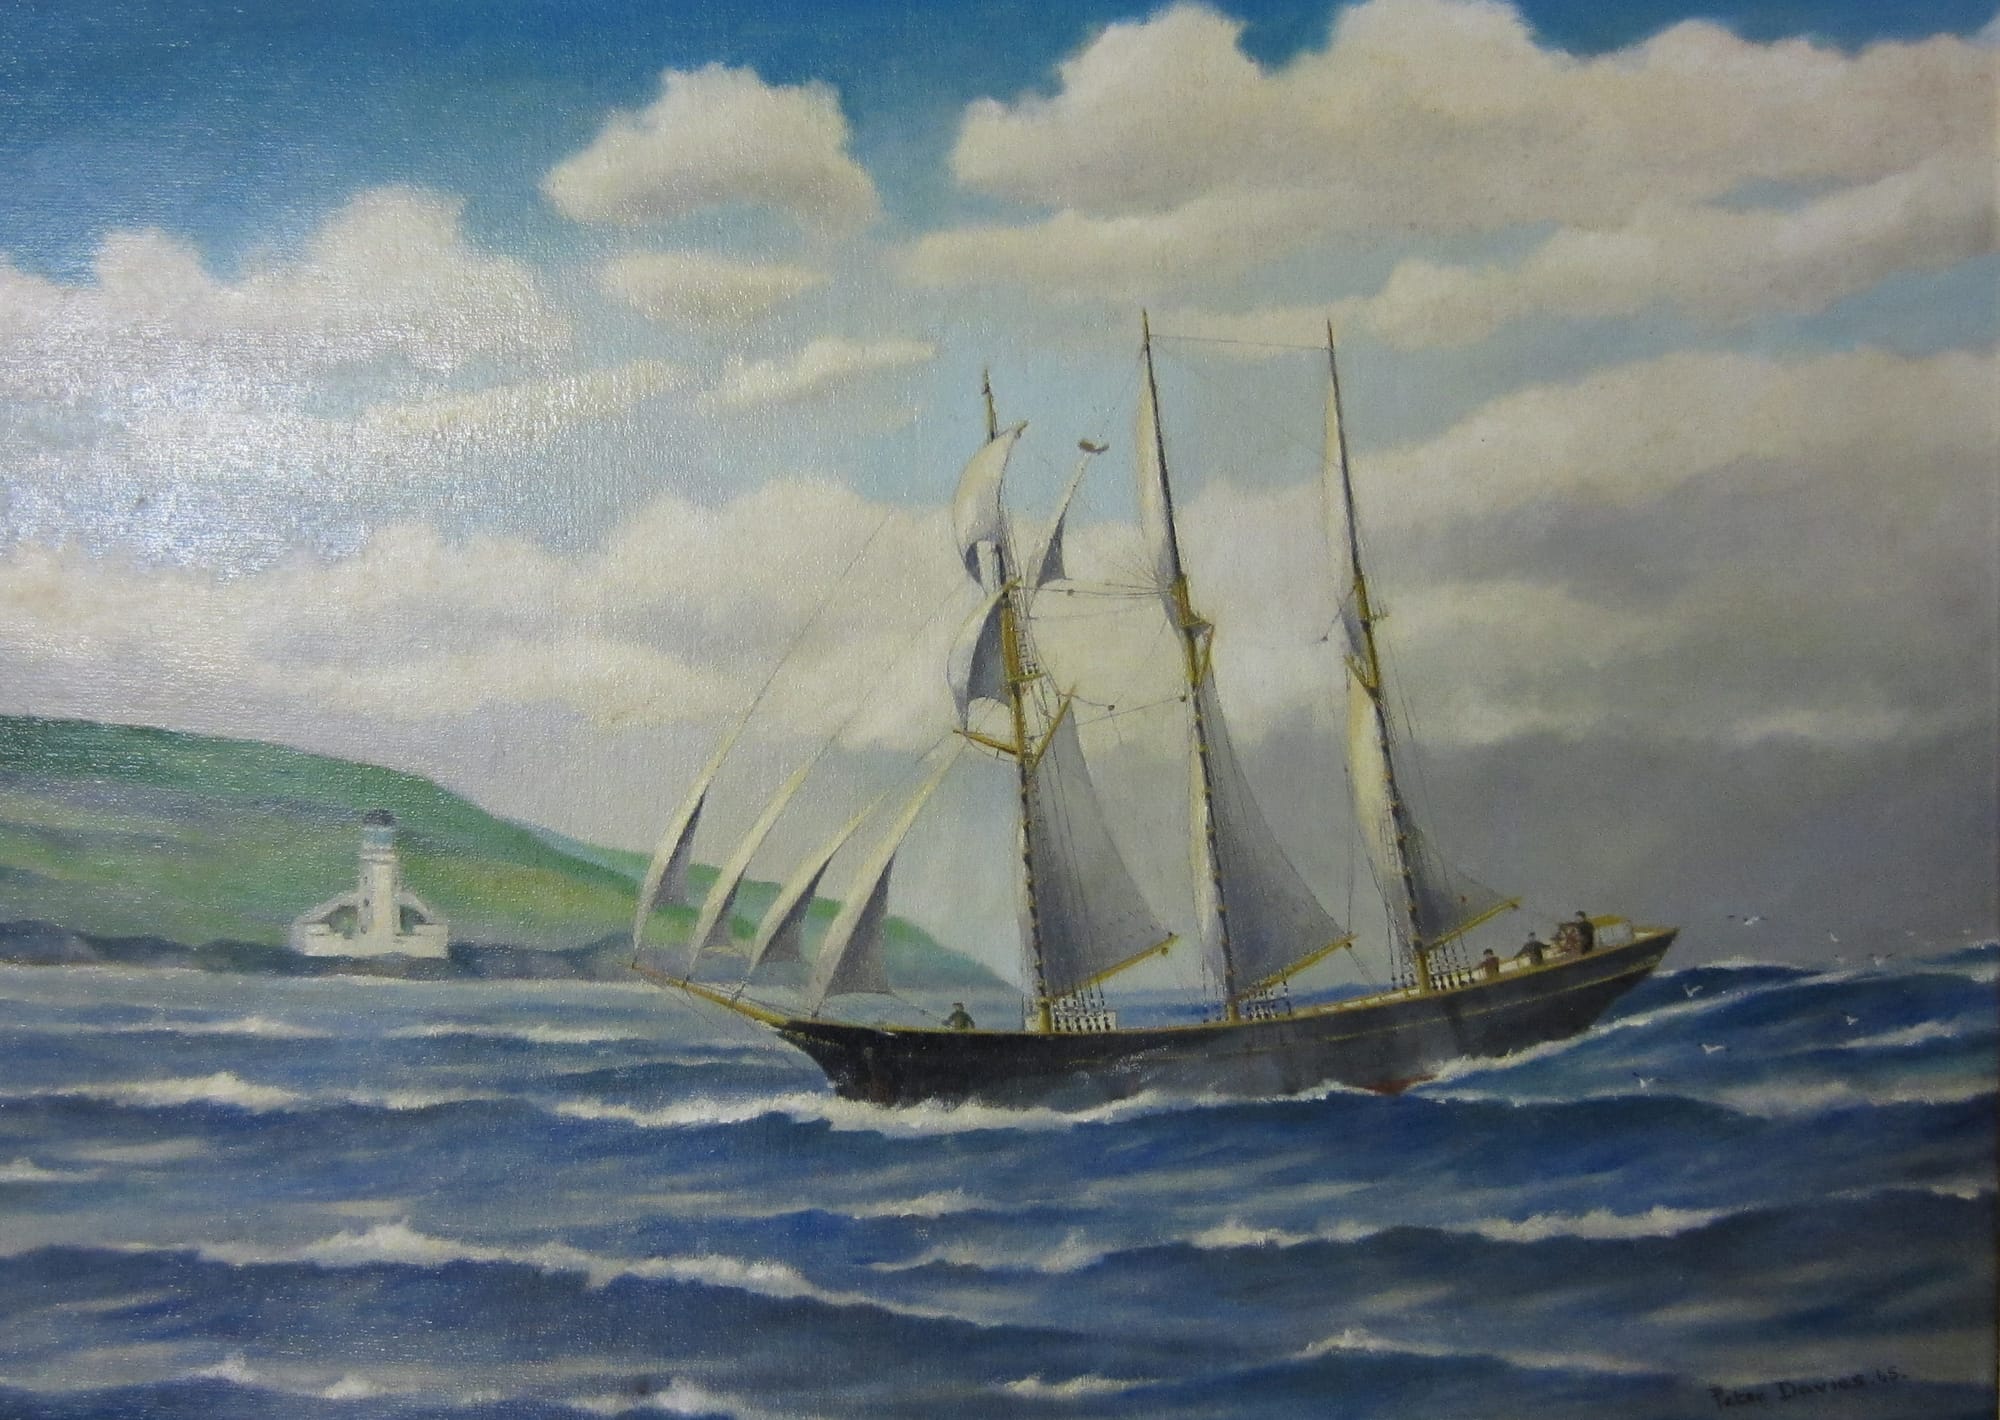 The Trevellas, a 3-masted schooner launched at Trevaunance Cove in 1876